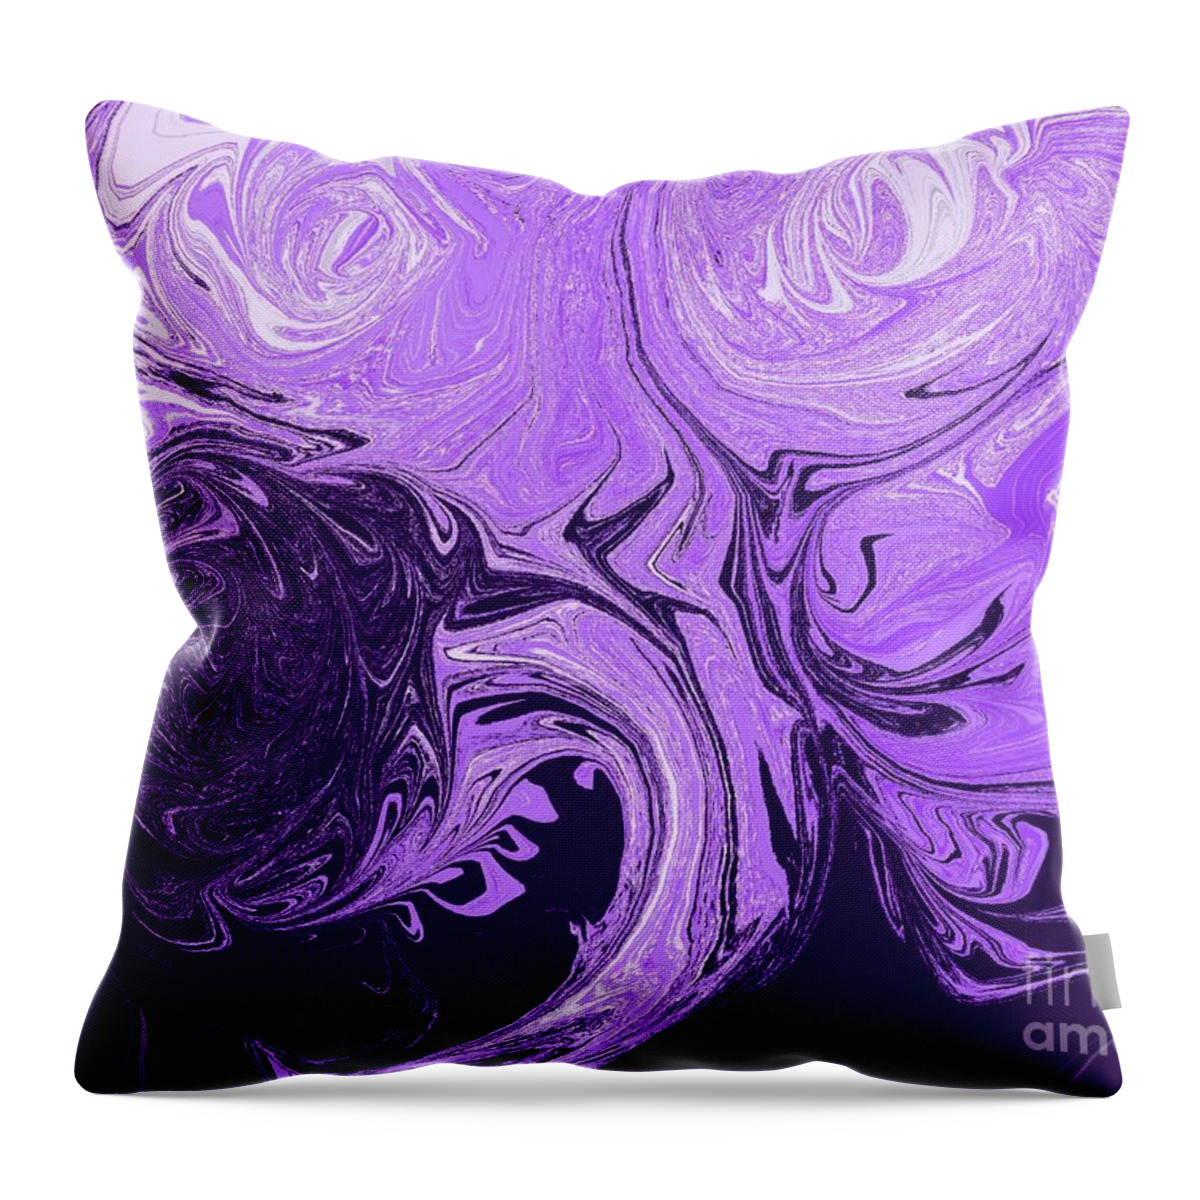 Werewolf Throw Pillow featuring the painting Werewolf by Roxy Riou